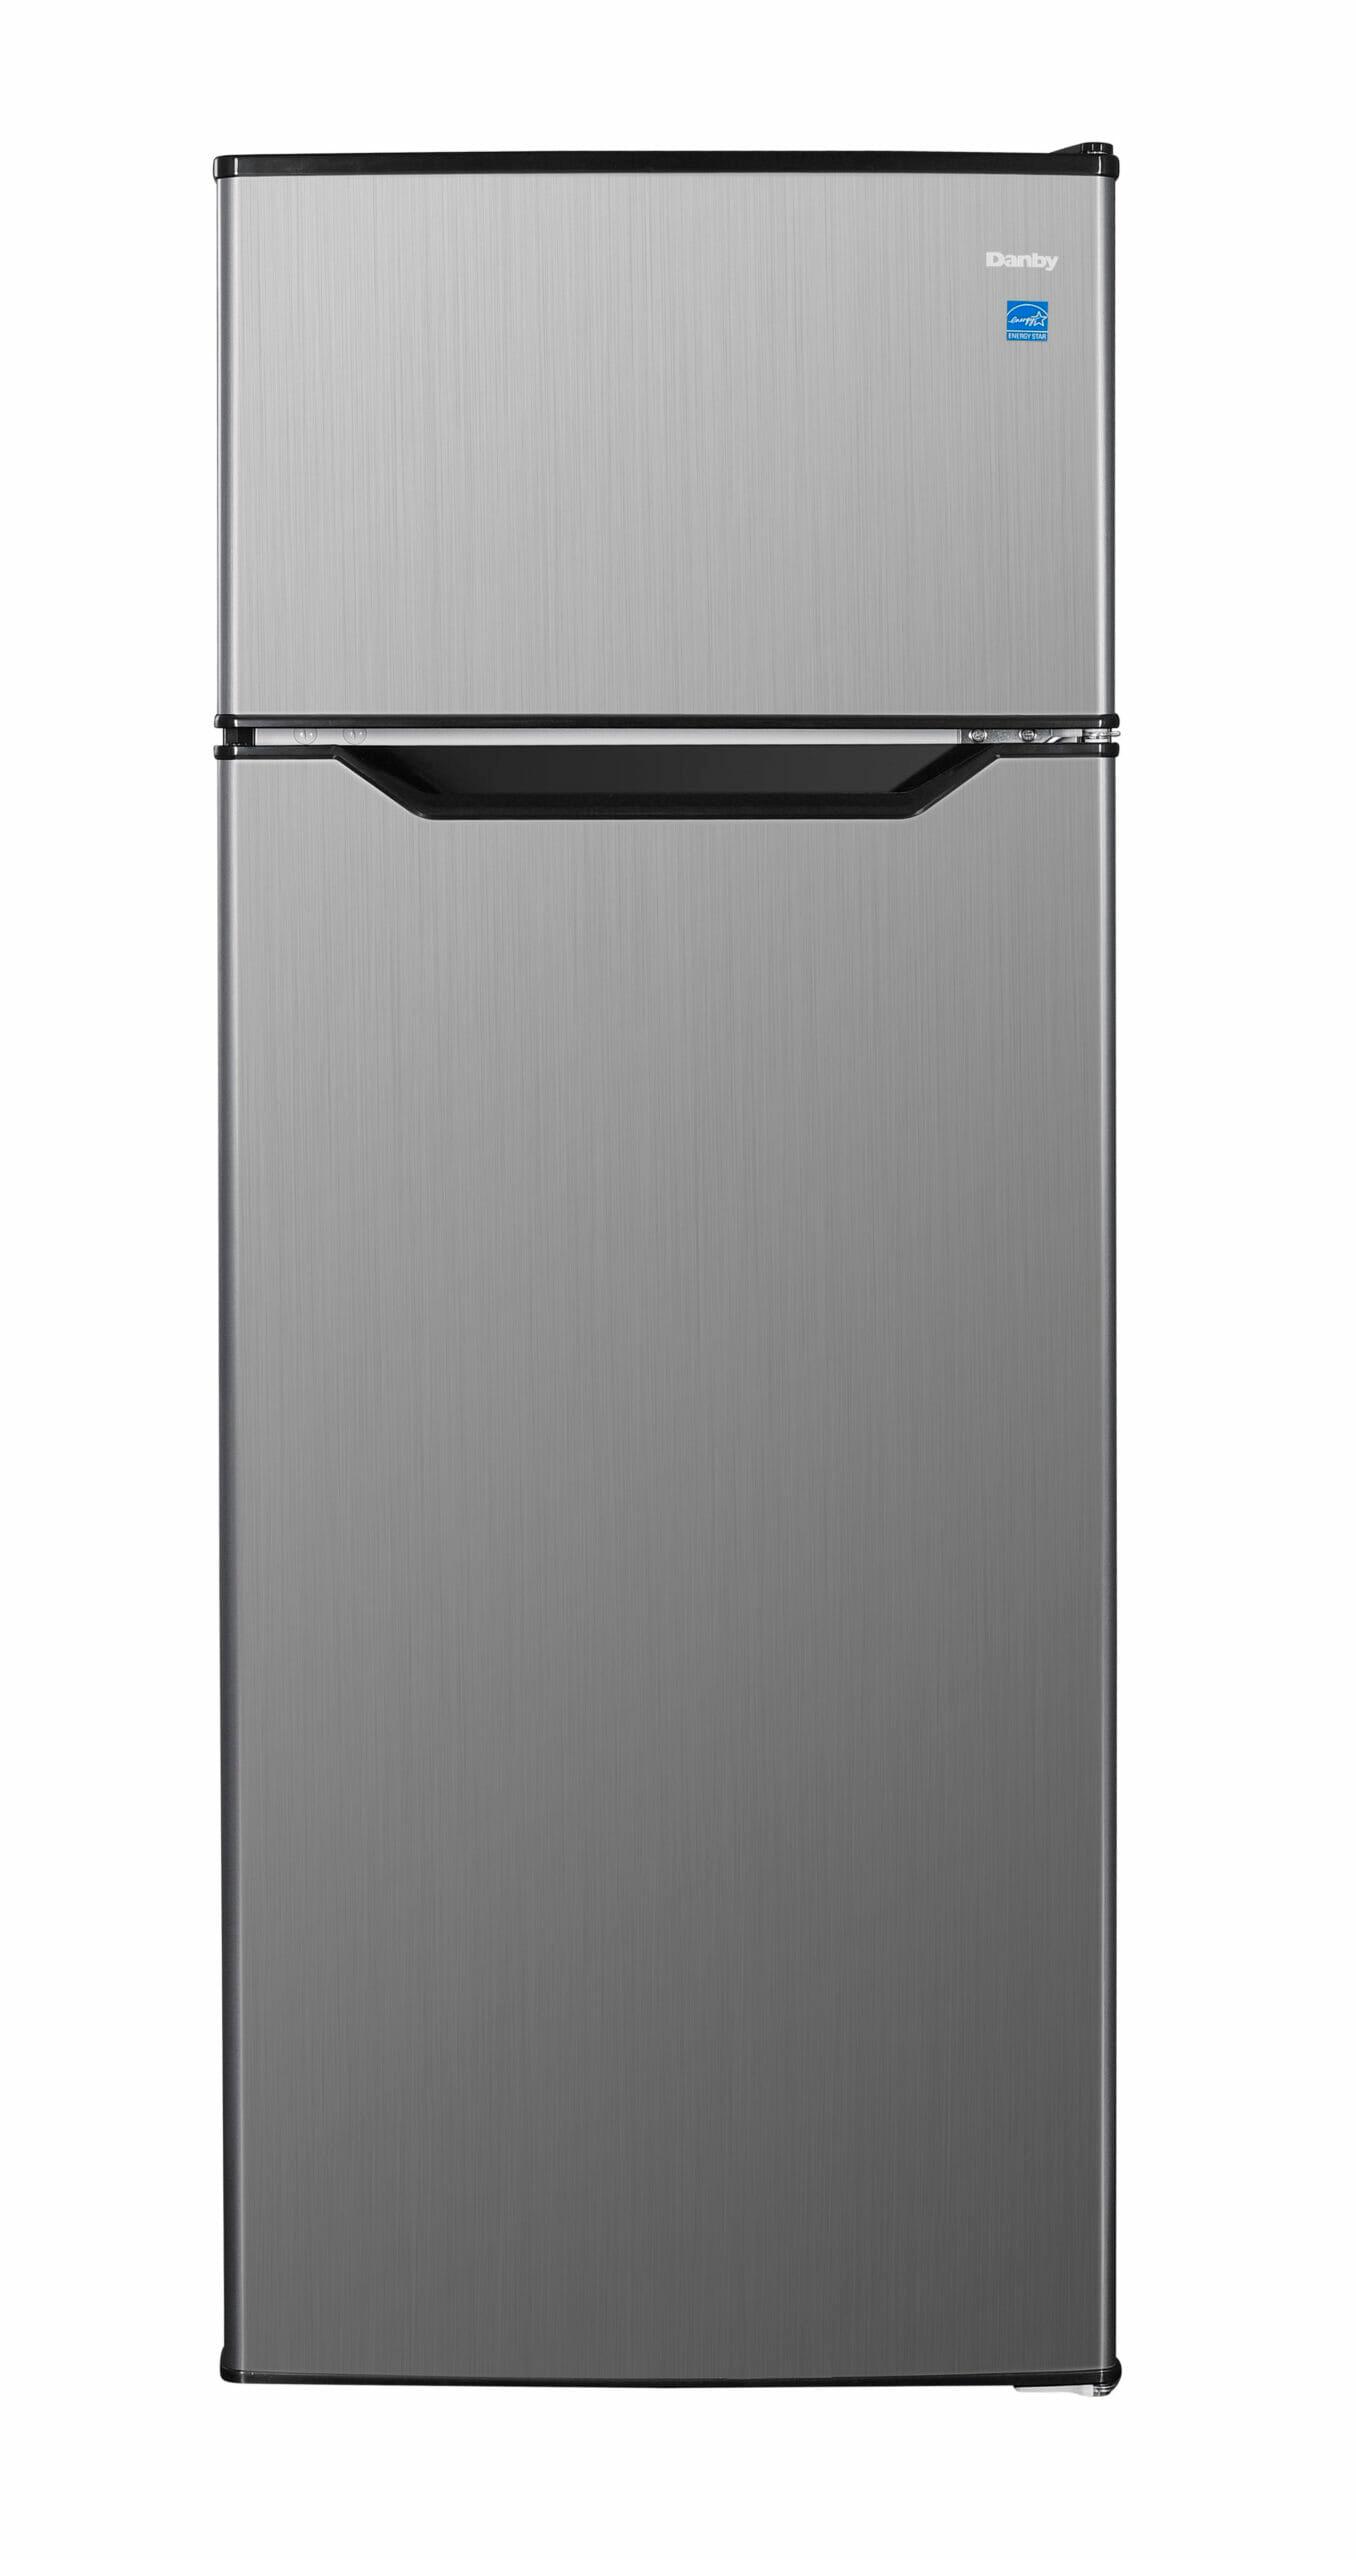 Danby 7.4 cu. ft. Apartment Size Fridge Top Mount in Stainless Steel